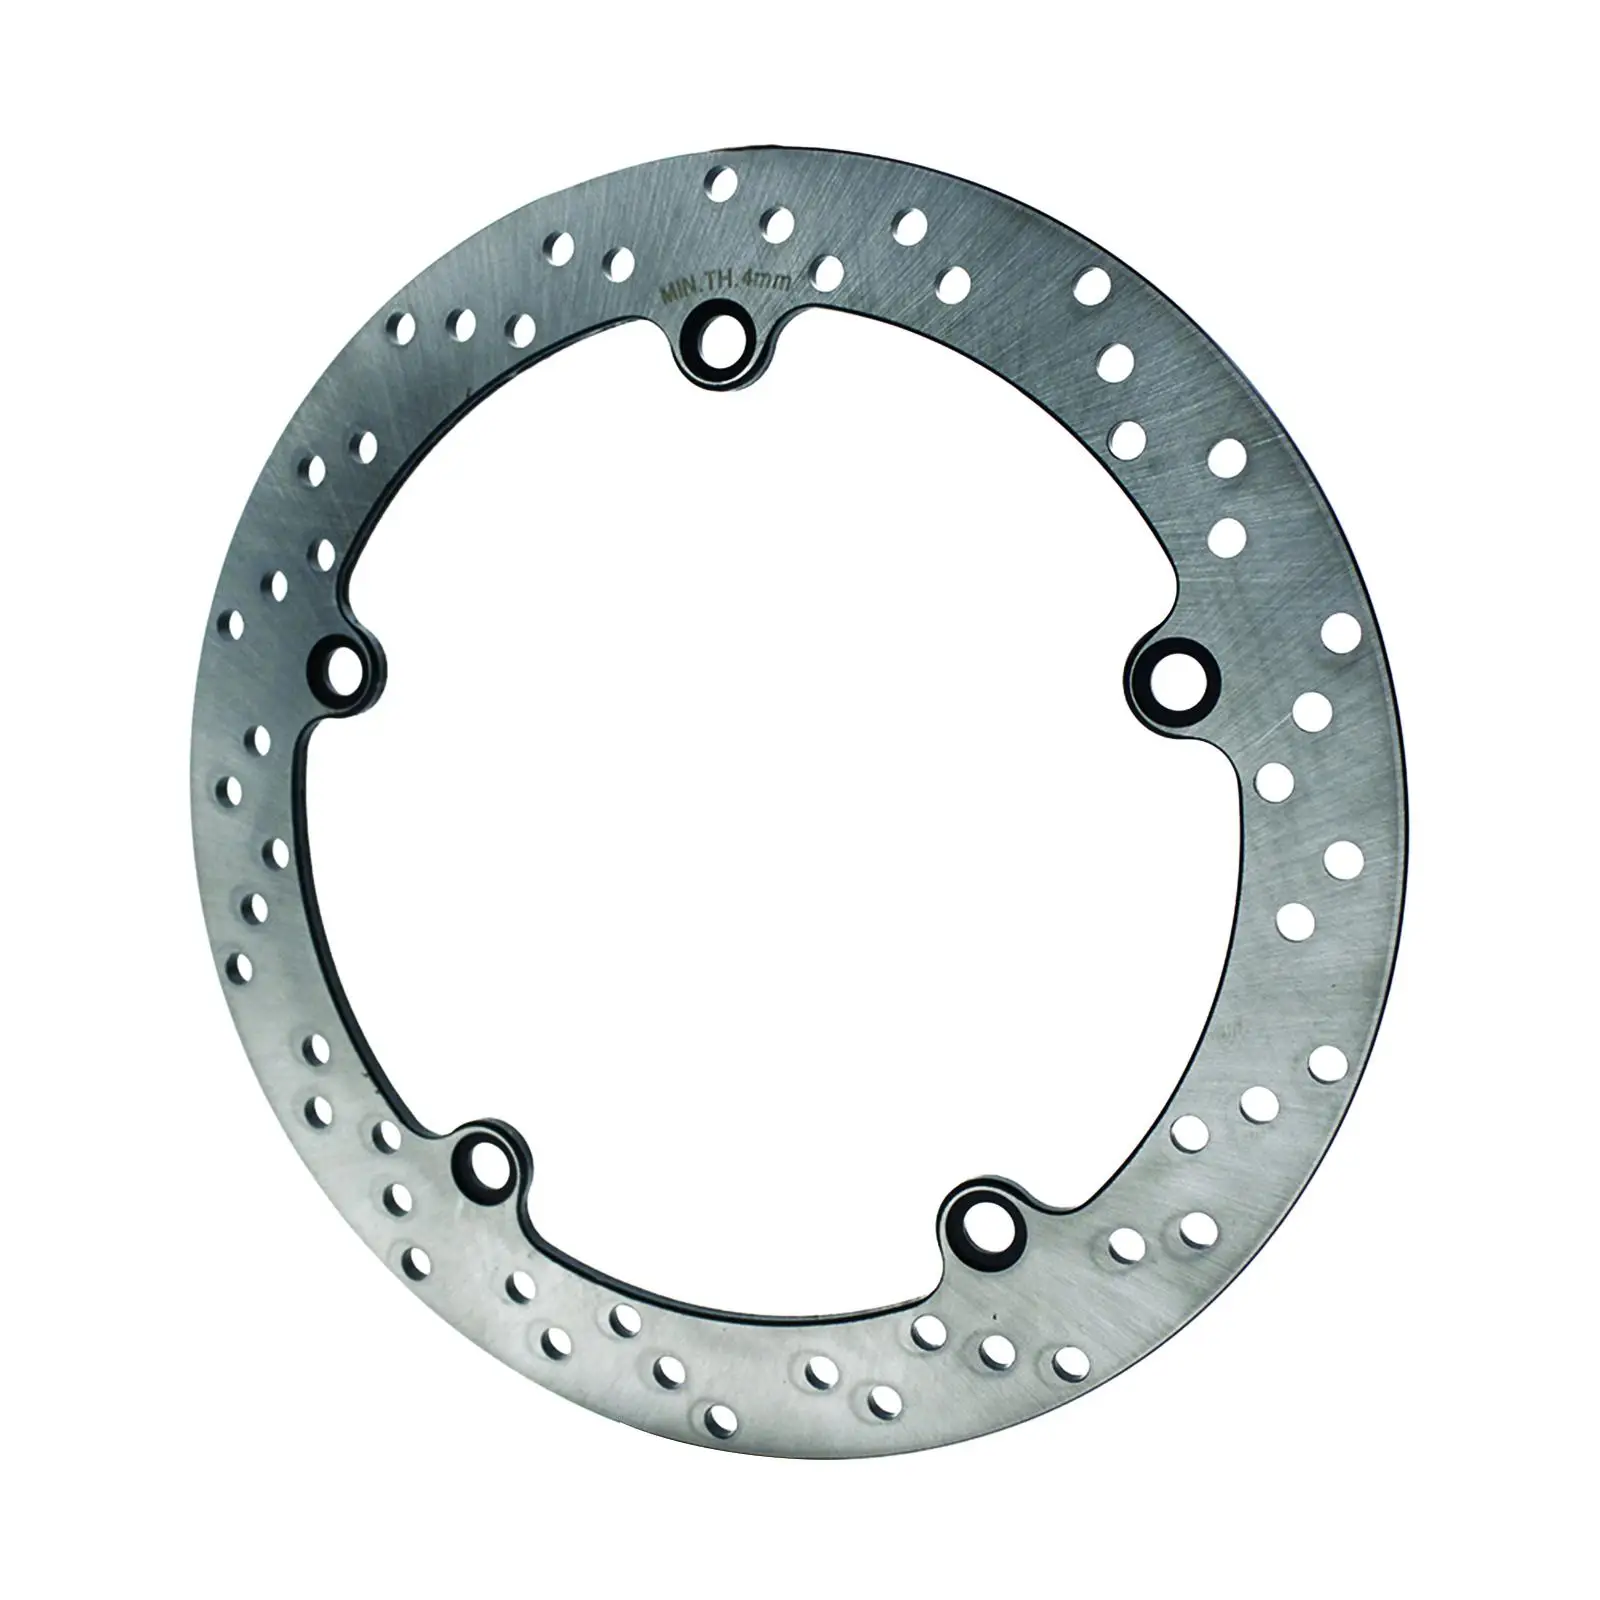 Motorcycle Rear Brake Disc Rotor for BMW R1100GS R1100R Easy to Install